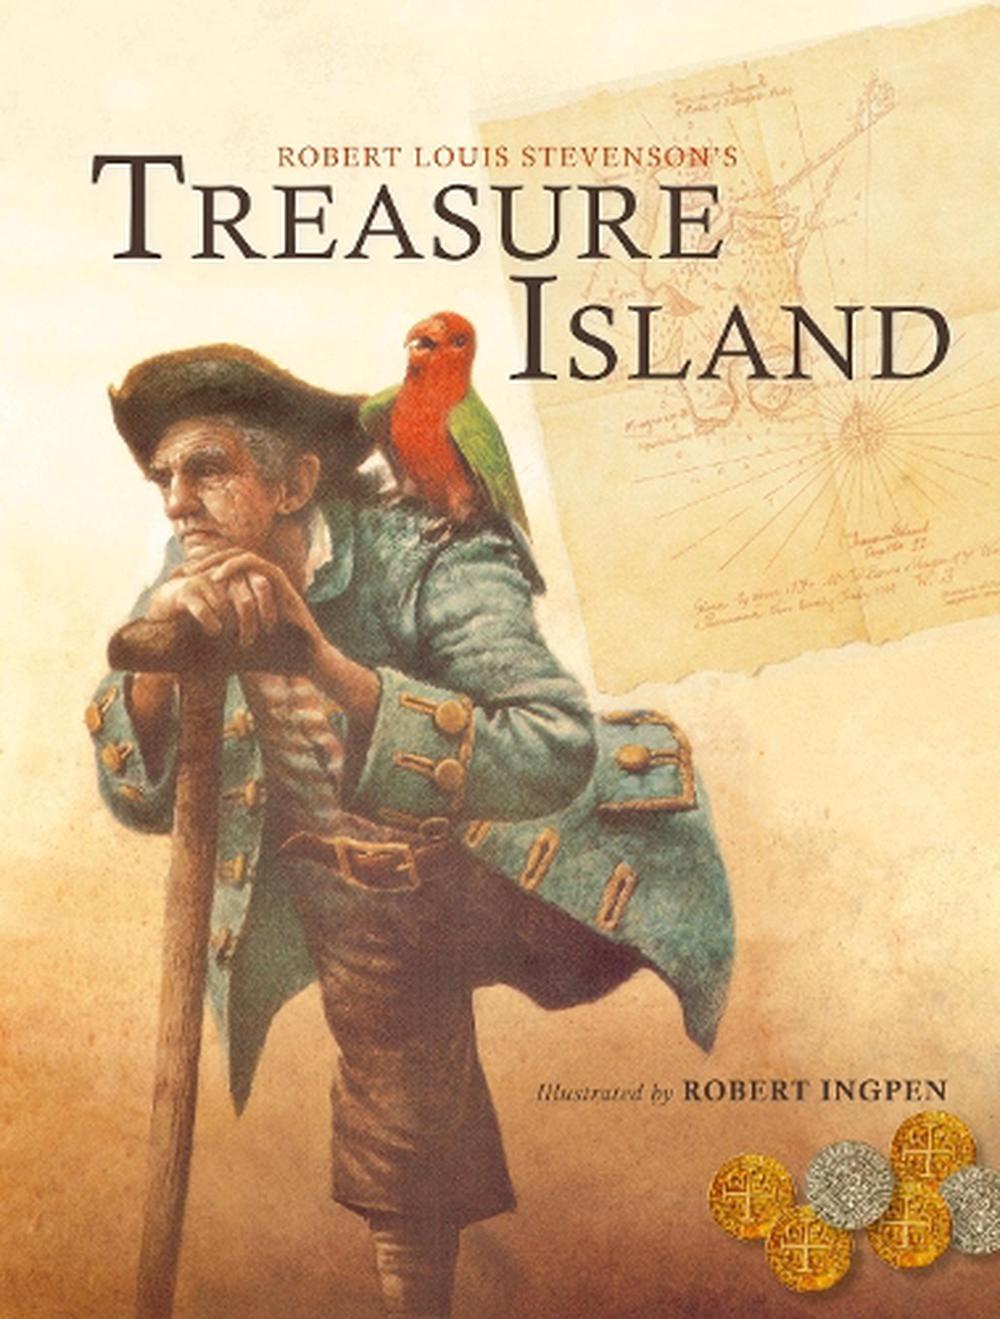 book review on treasure island